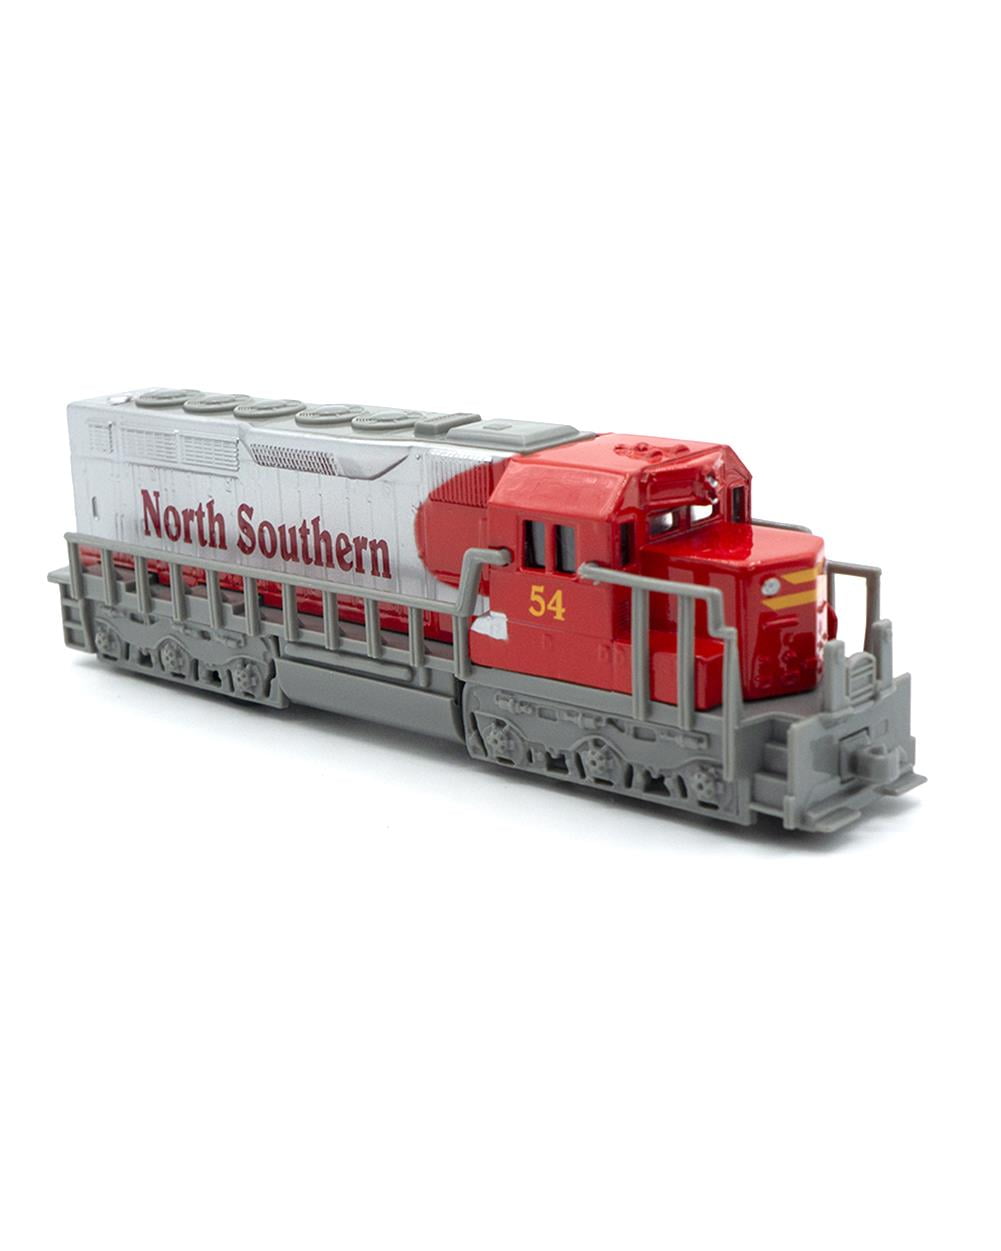 Freight Locomotive North Southern Showcasts Diecast 6.75" Red 